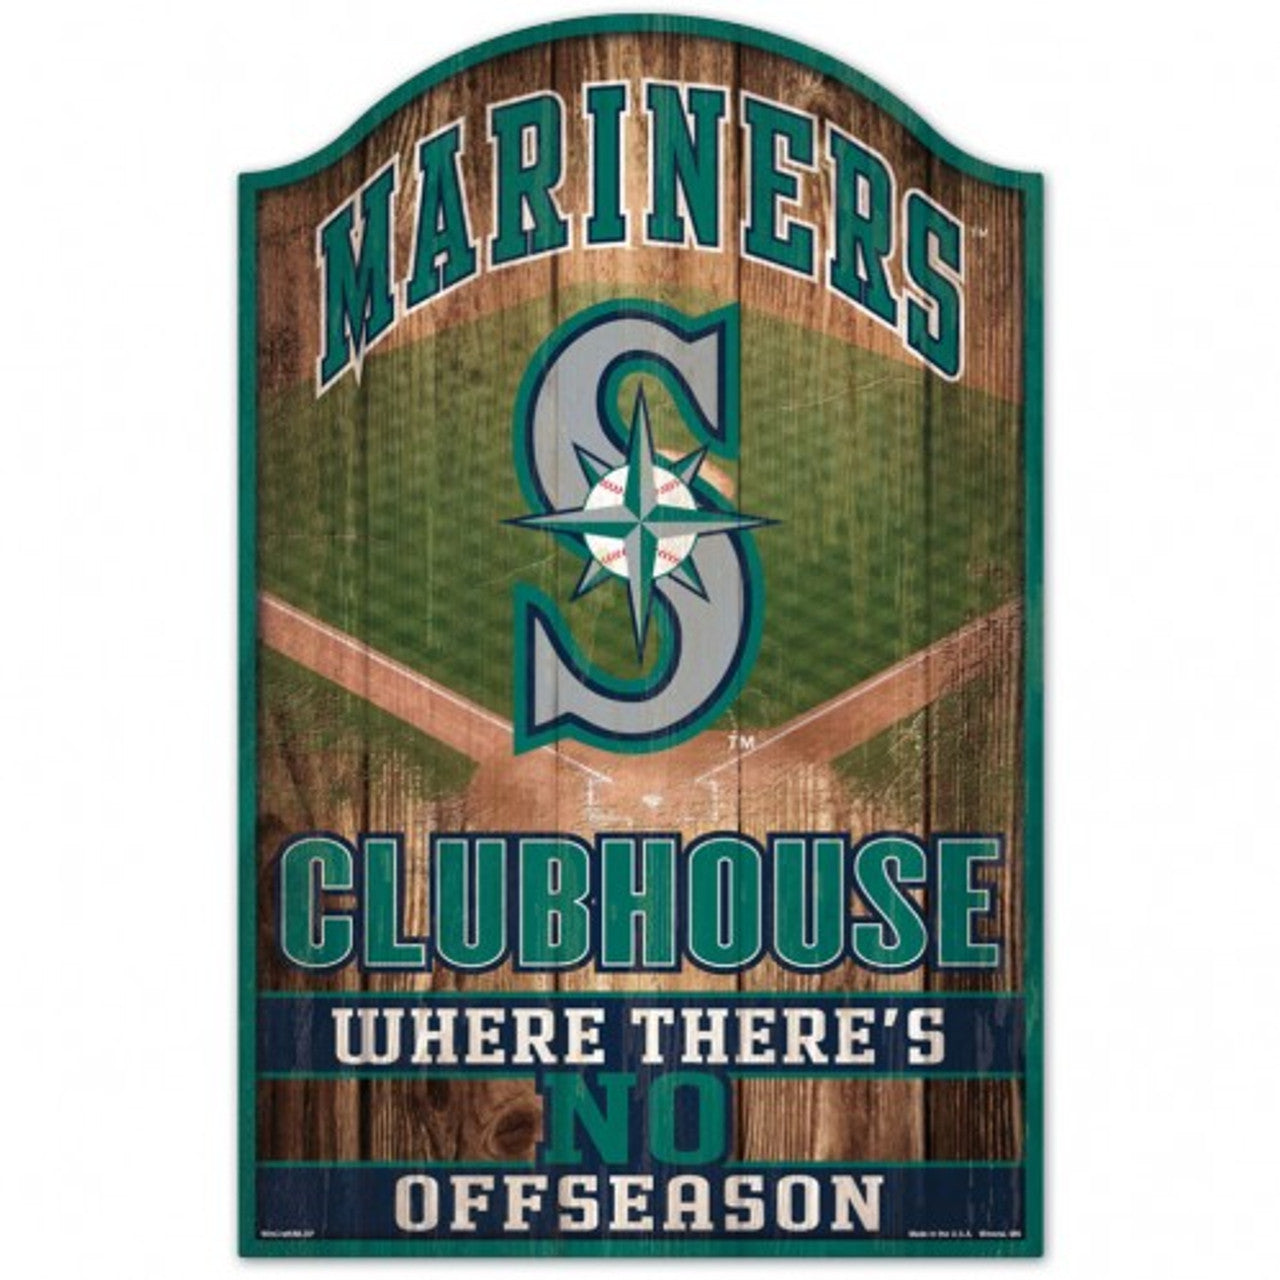 Seattle Mariners 11" x 17" Fan Cave Wood Sign by Wincraft